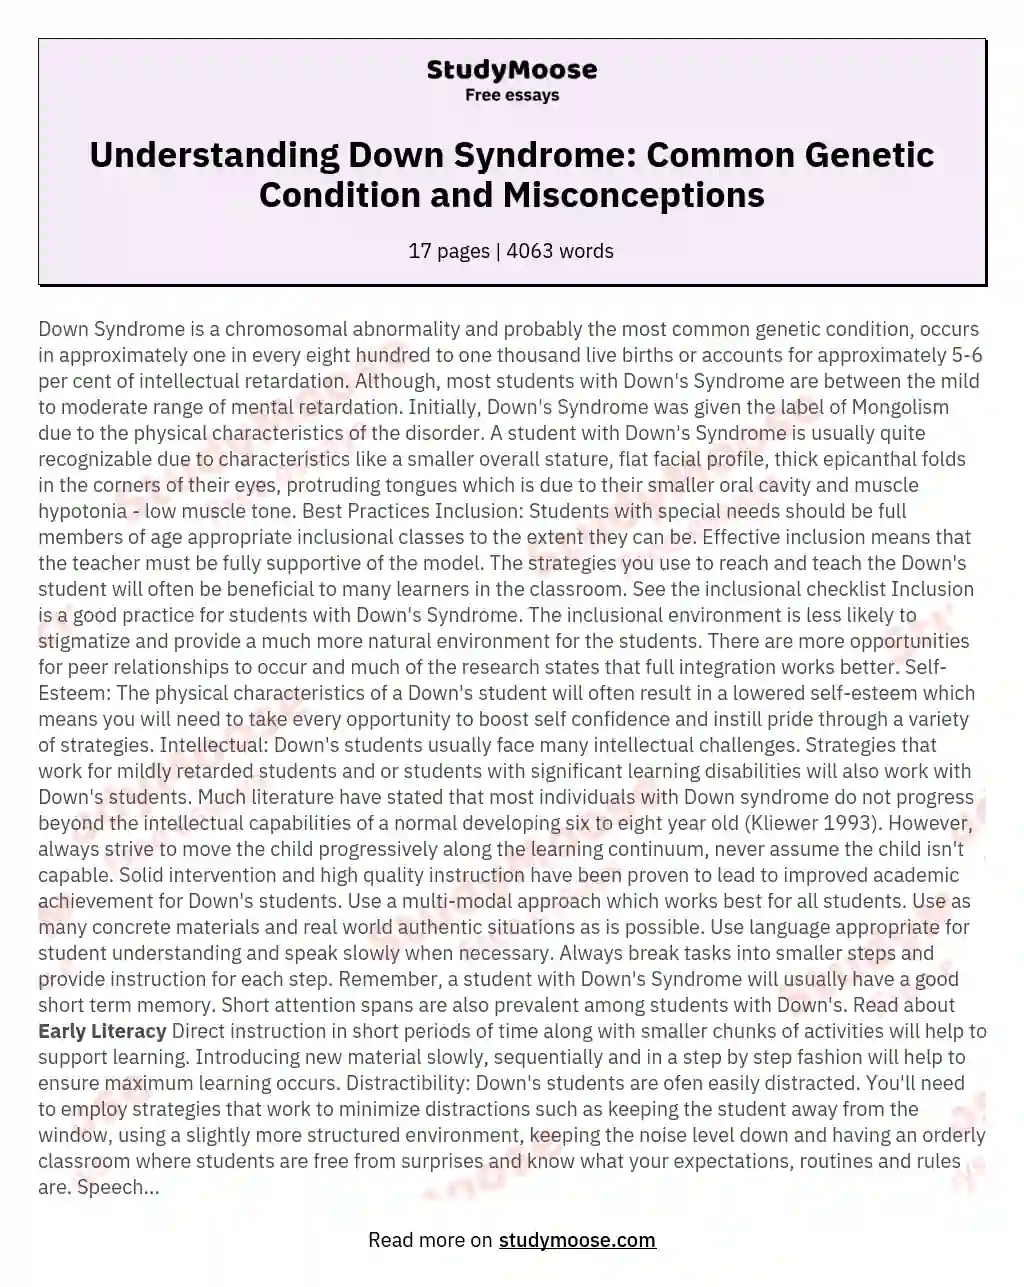 Understanding Down Syndrome: Common Genetic Condition and Misconceptions essay